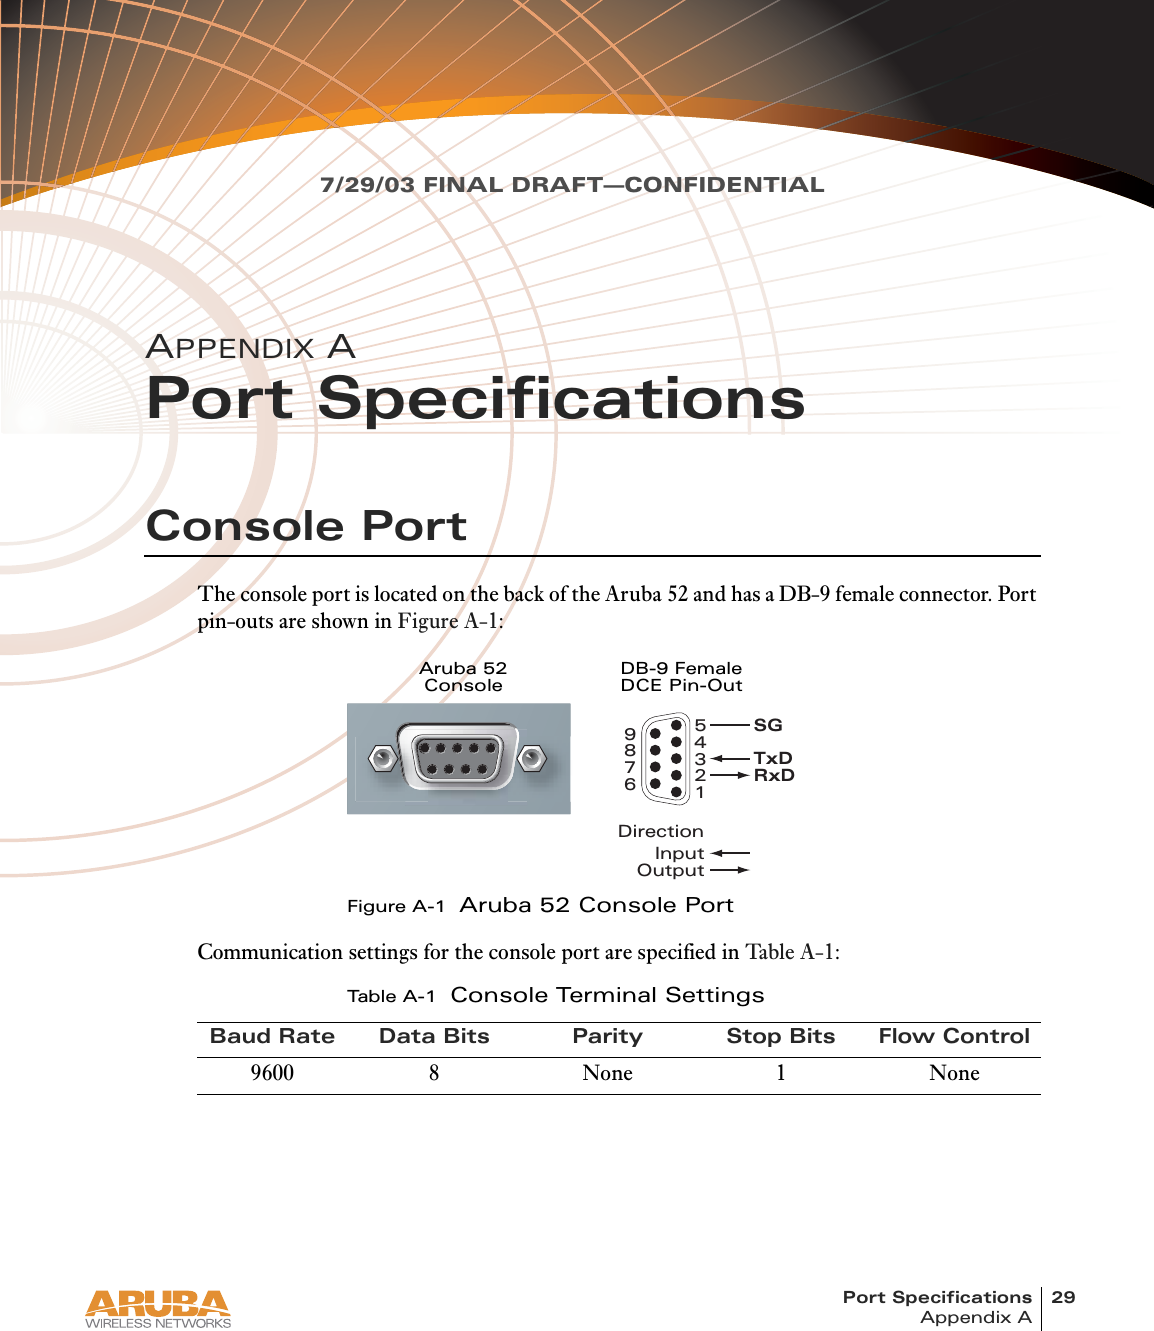 Port Specifications 29Appendix A7/29/03 FINAL DRAFT—CONFIDENTIAL7/29/03 FINAL DRAFT—CONFIDENTIALAPPENDIX APort SpecificationsConsole PortThe console port is located on the back of the Aruba 52 and has a DB-9 female connector. Port pin-outs are shown in Figure A-1:Figure A-1  Aruba 52 Console PortCommunication settings for the console port are specified in Table A- 1:Tab l e A -1  Console Terminal SettingsBaud Rate Data Bits Parity Stop Bits Flow Control9600 8 None 1 NoneDirectionRxDTxDSG543219876InputOutputAruba 52ConsoleDB-9 FemaleDCE Pin-Out